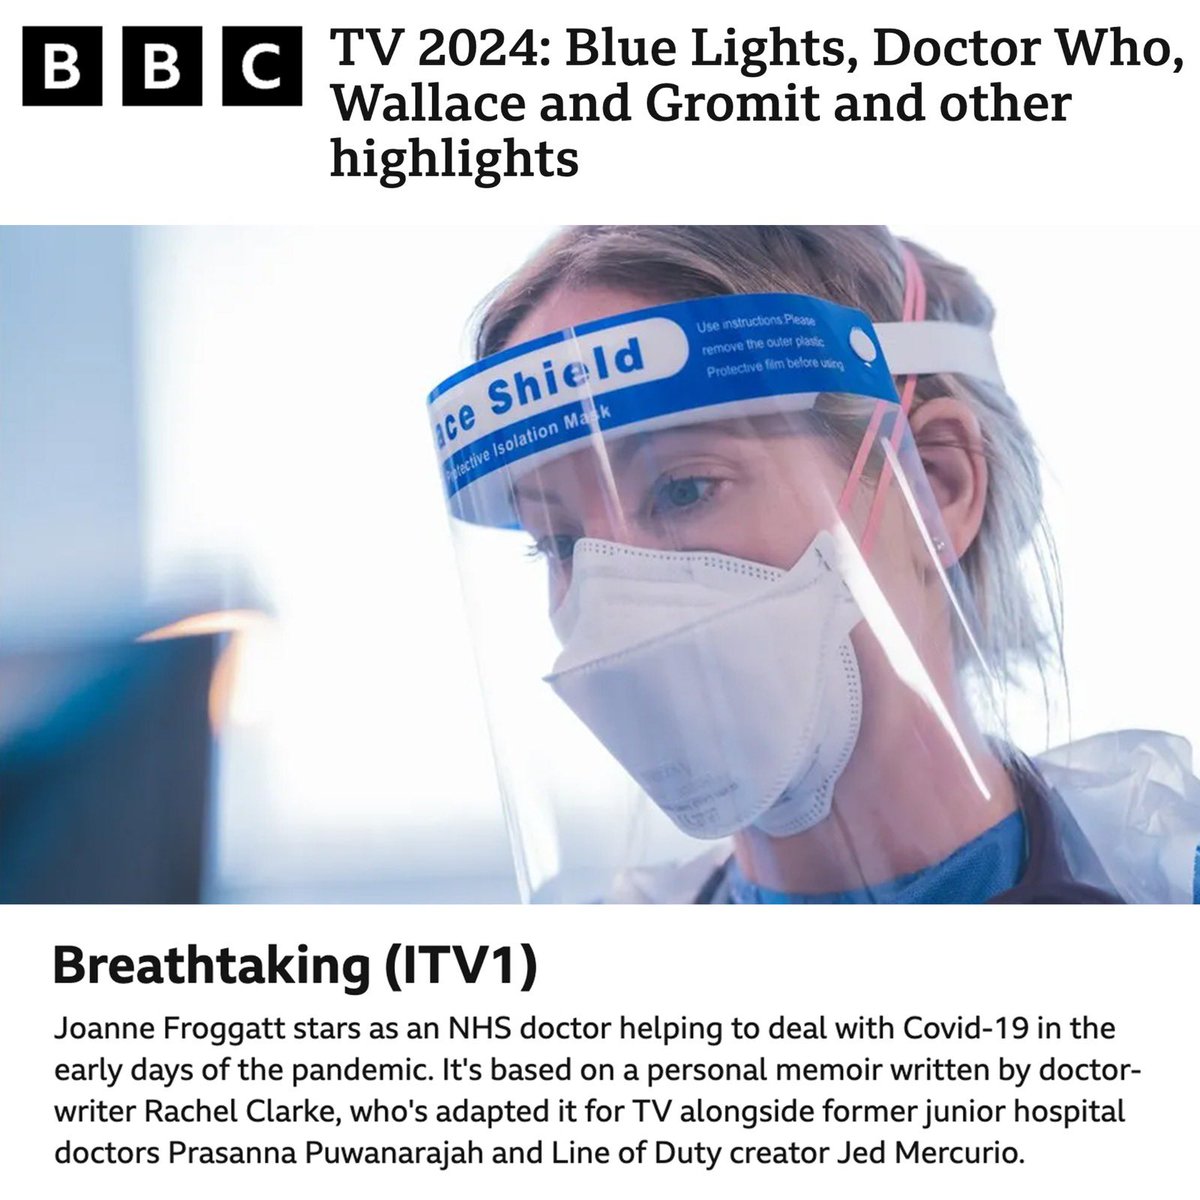 BREATHTAKING, features in BBC’s 24 shows to watch in 24. I realise this will be very triggering for some people, but if you are able to watch, please do as we shouldn’t look away from this story, of what our NHS workers really experienced during the pandemic #NHS #ITV